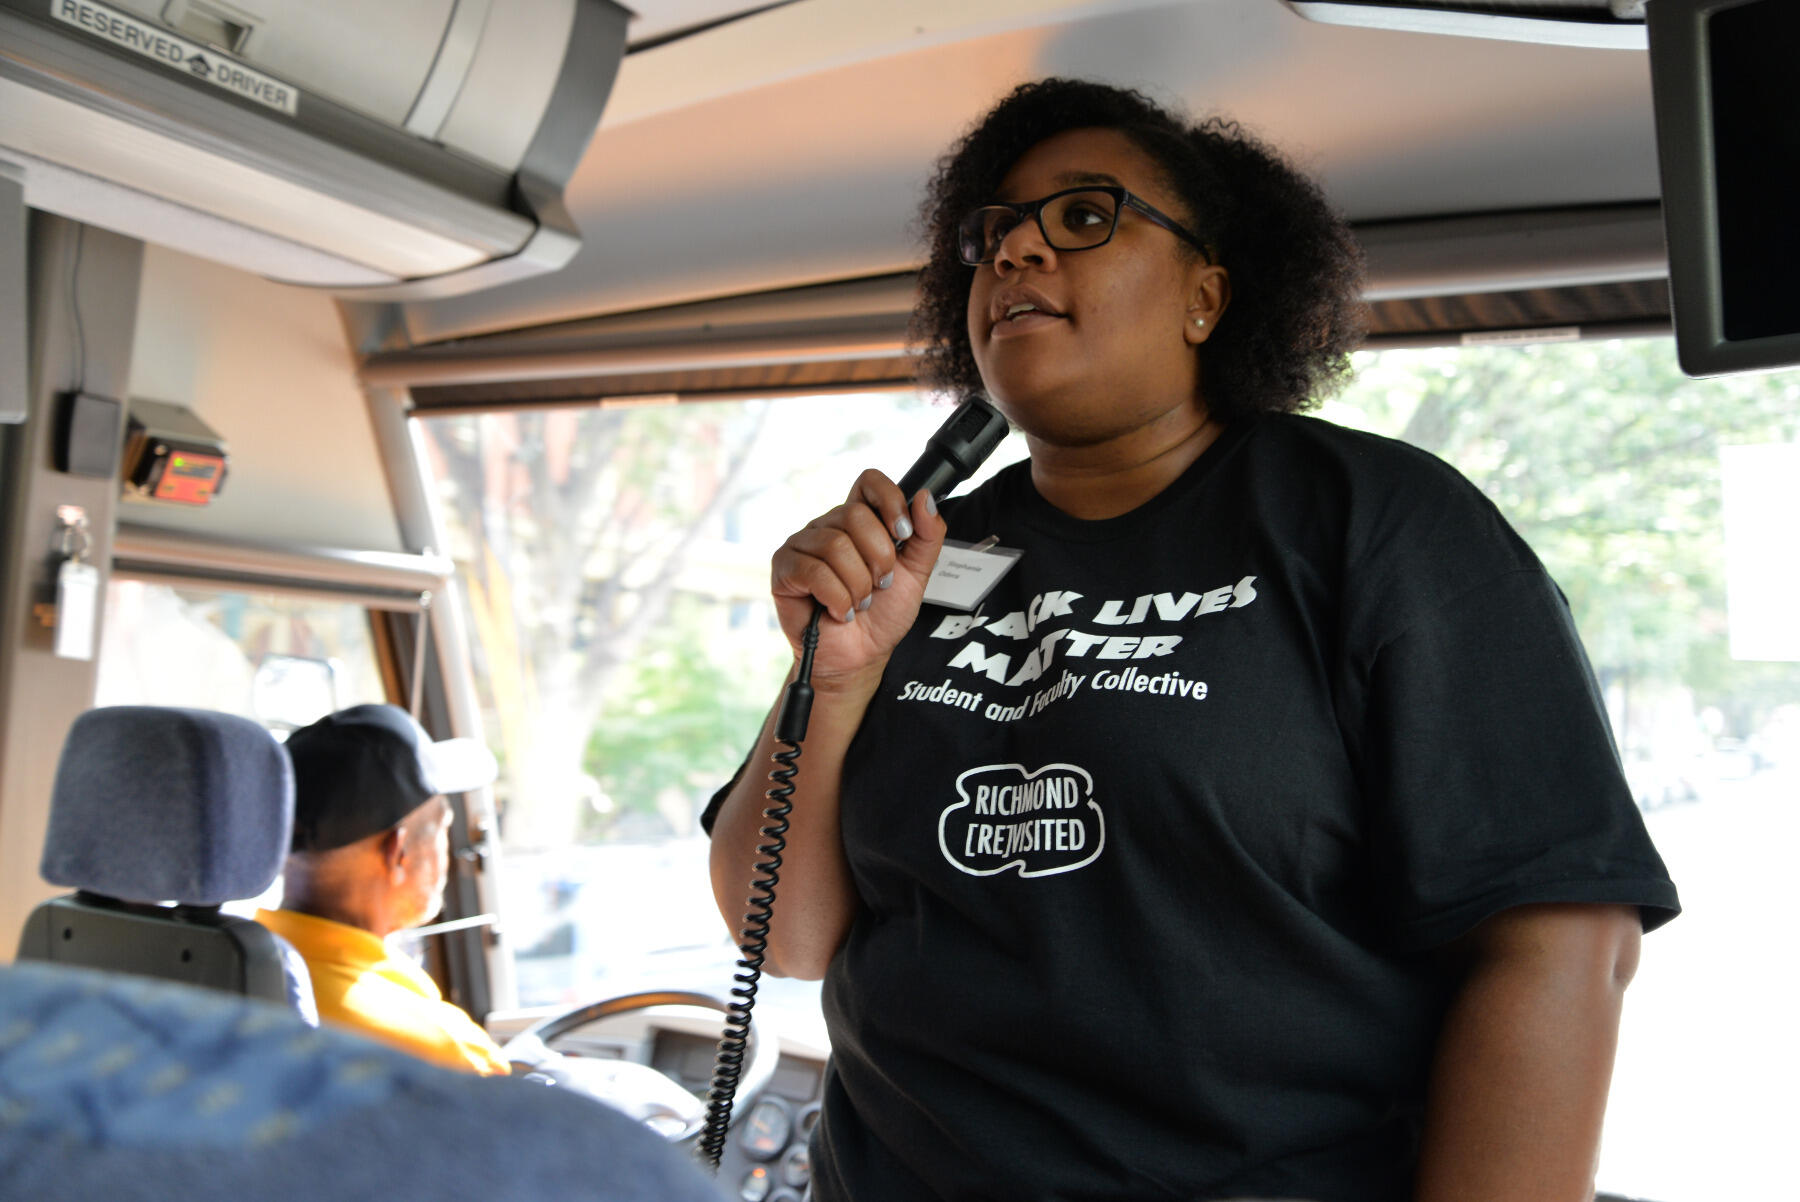 Stephanie G. Odera, assistant professor in teaching at the School of Social Work, narrates a bus tour of Richmond that included public housing developments Gilpin Court and Mosby Court, the Richmond Justice Center, Martin Luther King Jr. Middle School, Richmond Alternative School, and the Richmond Juvenile and Domestic Relations District Court.
